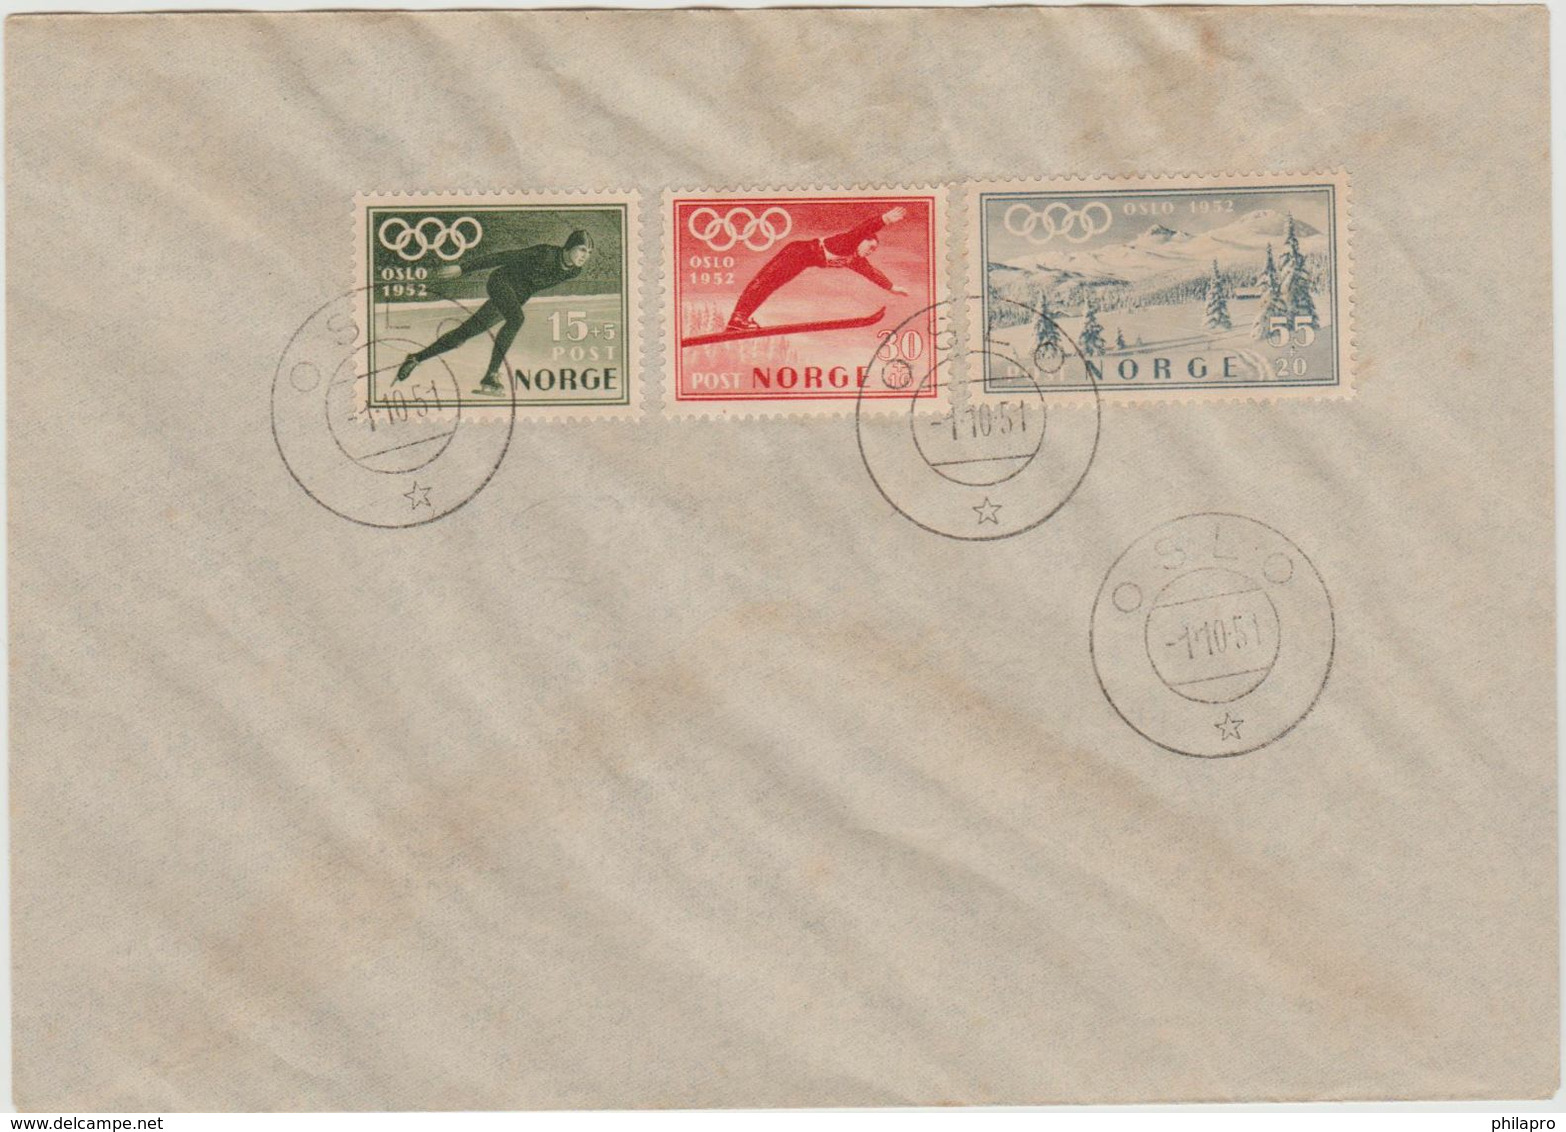 NORVEGE / NORWAY    FDC  OLYMPIC 1952  Réf  Q 556 - Winter 1952: Oslo